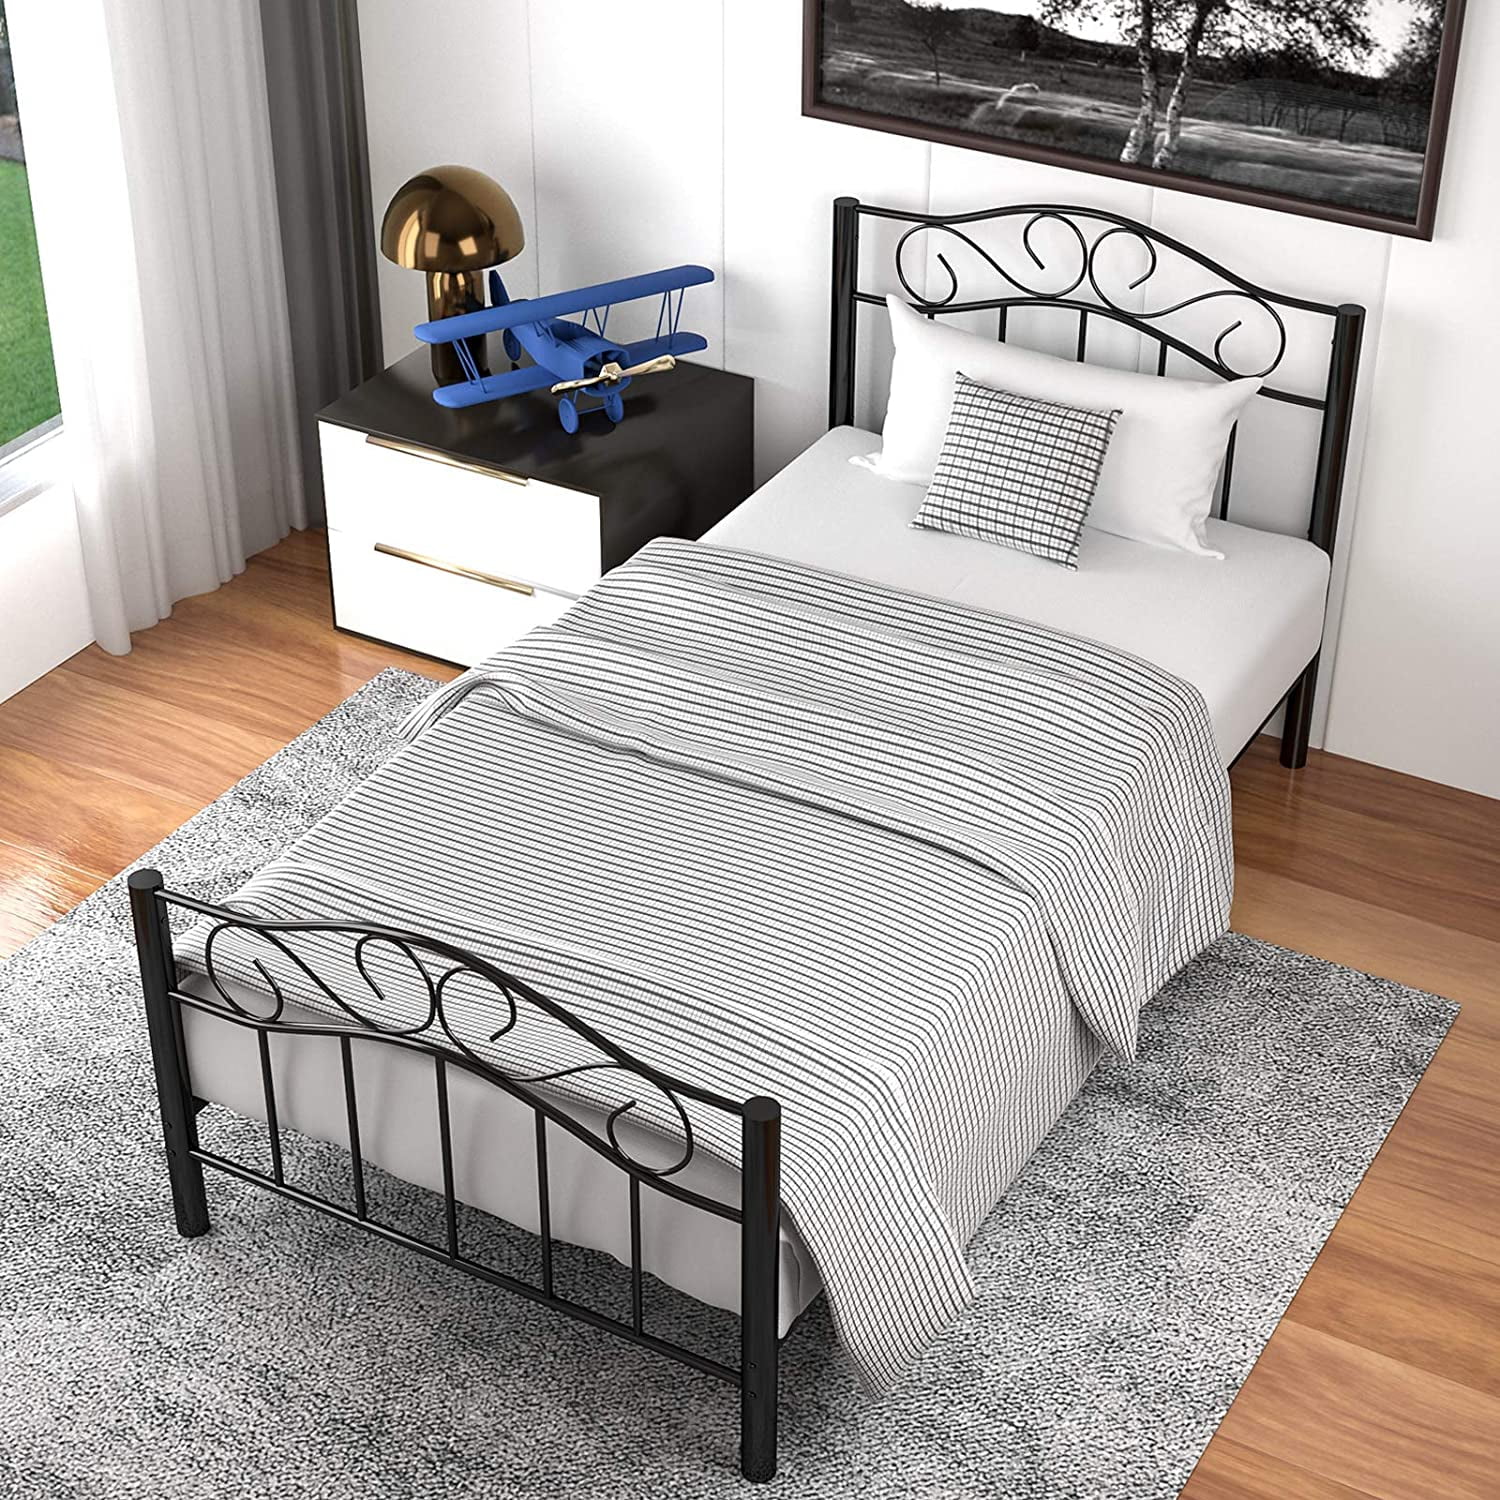 Mecor Twin Xl Curved Metal Bed Frame, Xl Twin Bed Mattress